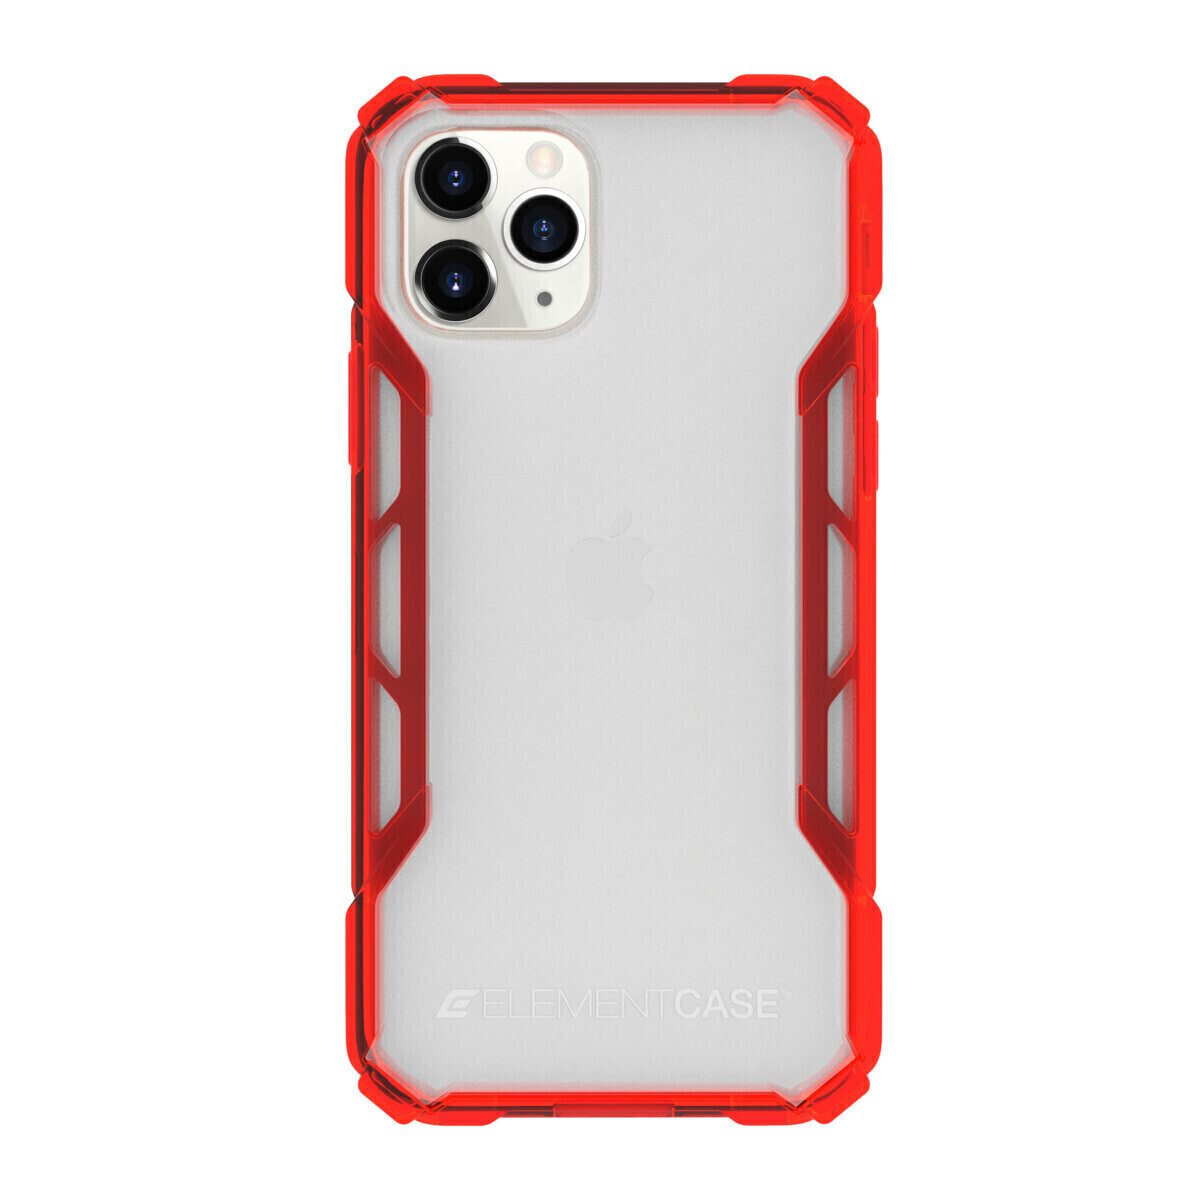 Element Case iPhone 11 Pro Max 6.5" Rally, Sunset Red